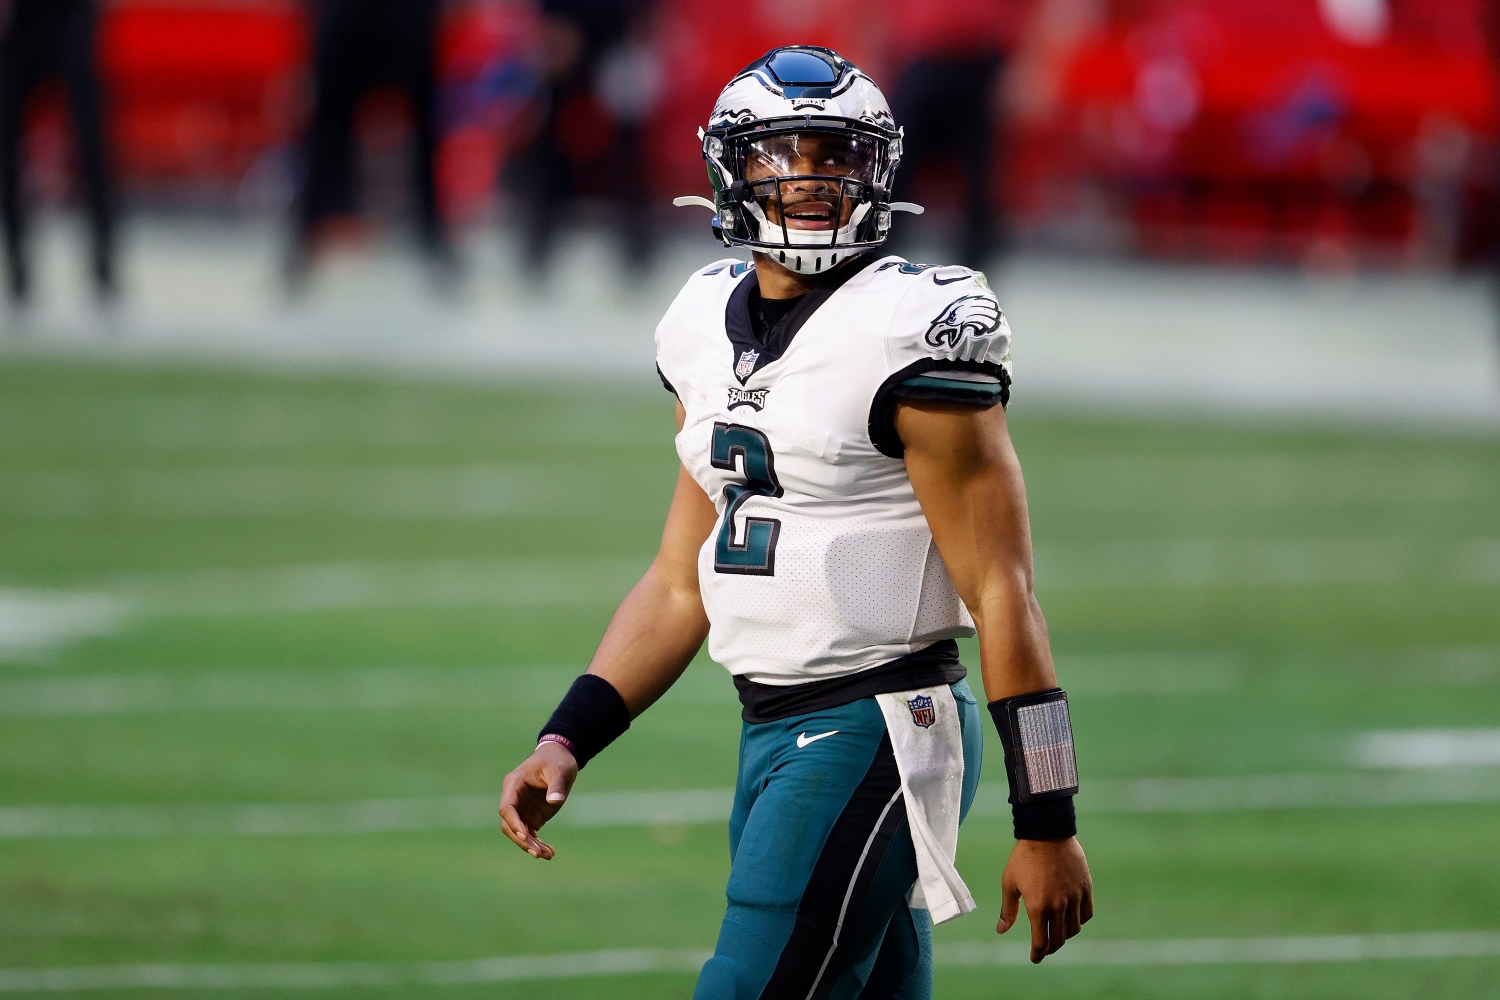 Quarterback Jalen Hurts of the Philadelphia Eagles walks off the field during a game against the Arizona Cardinals.